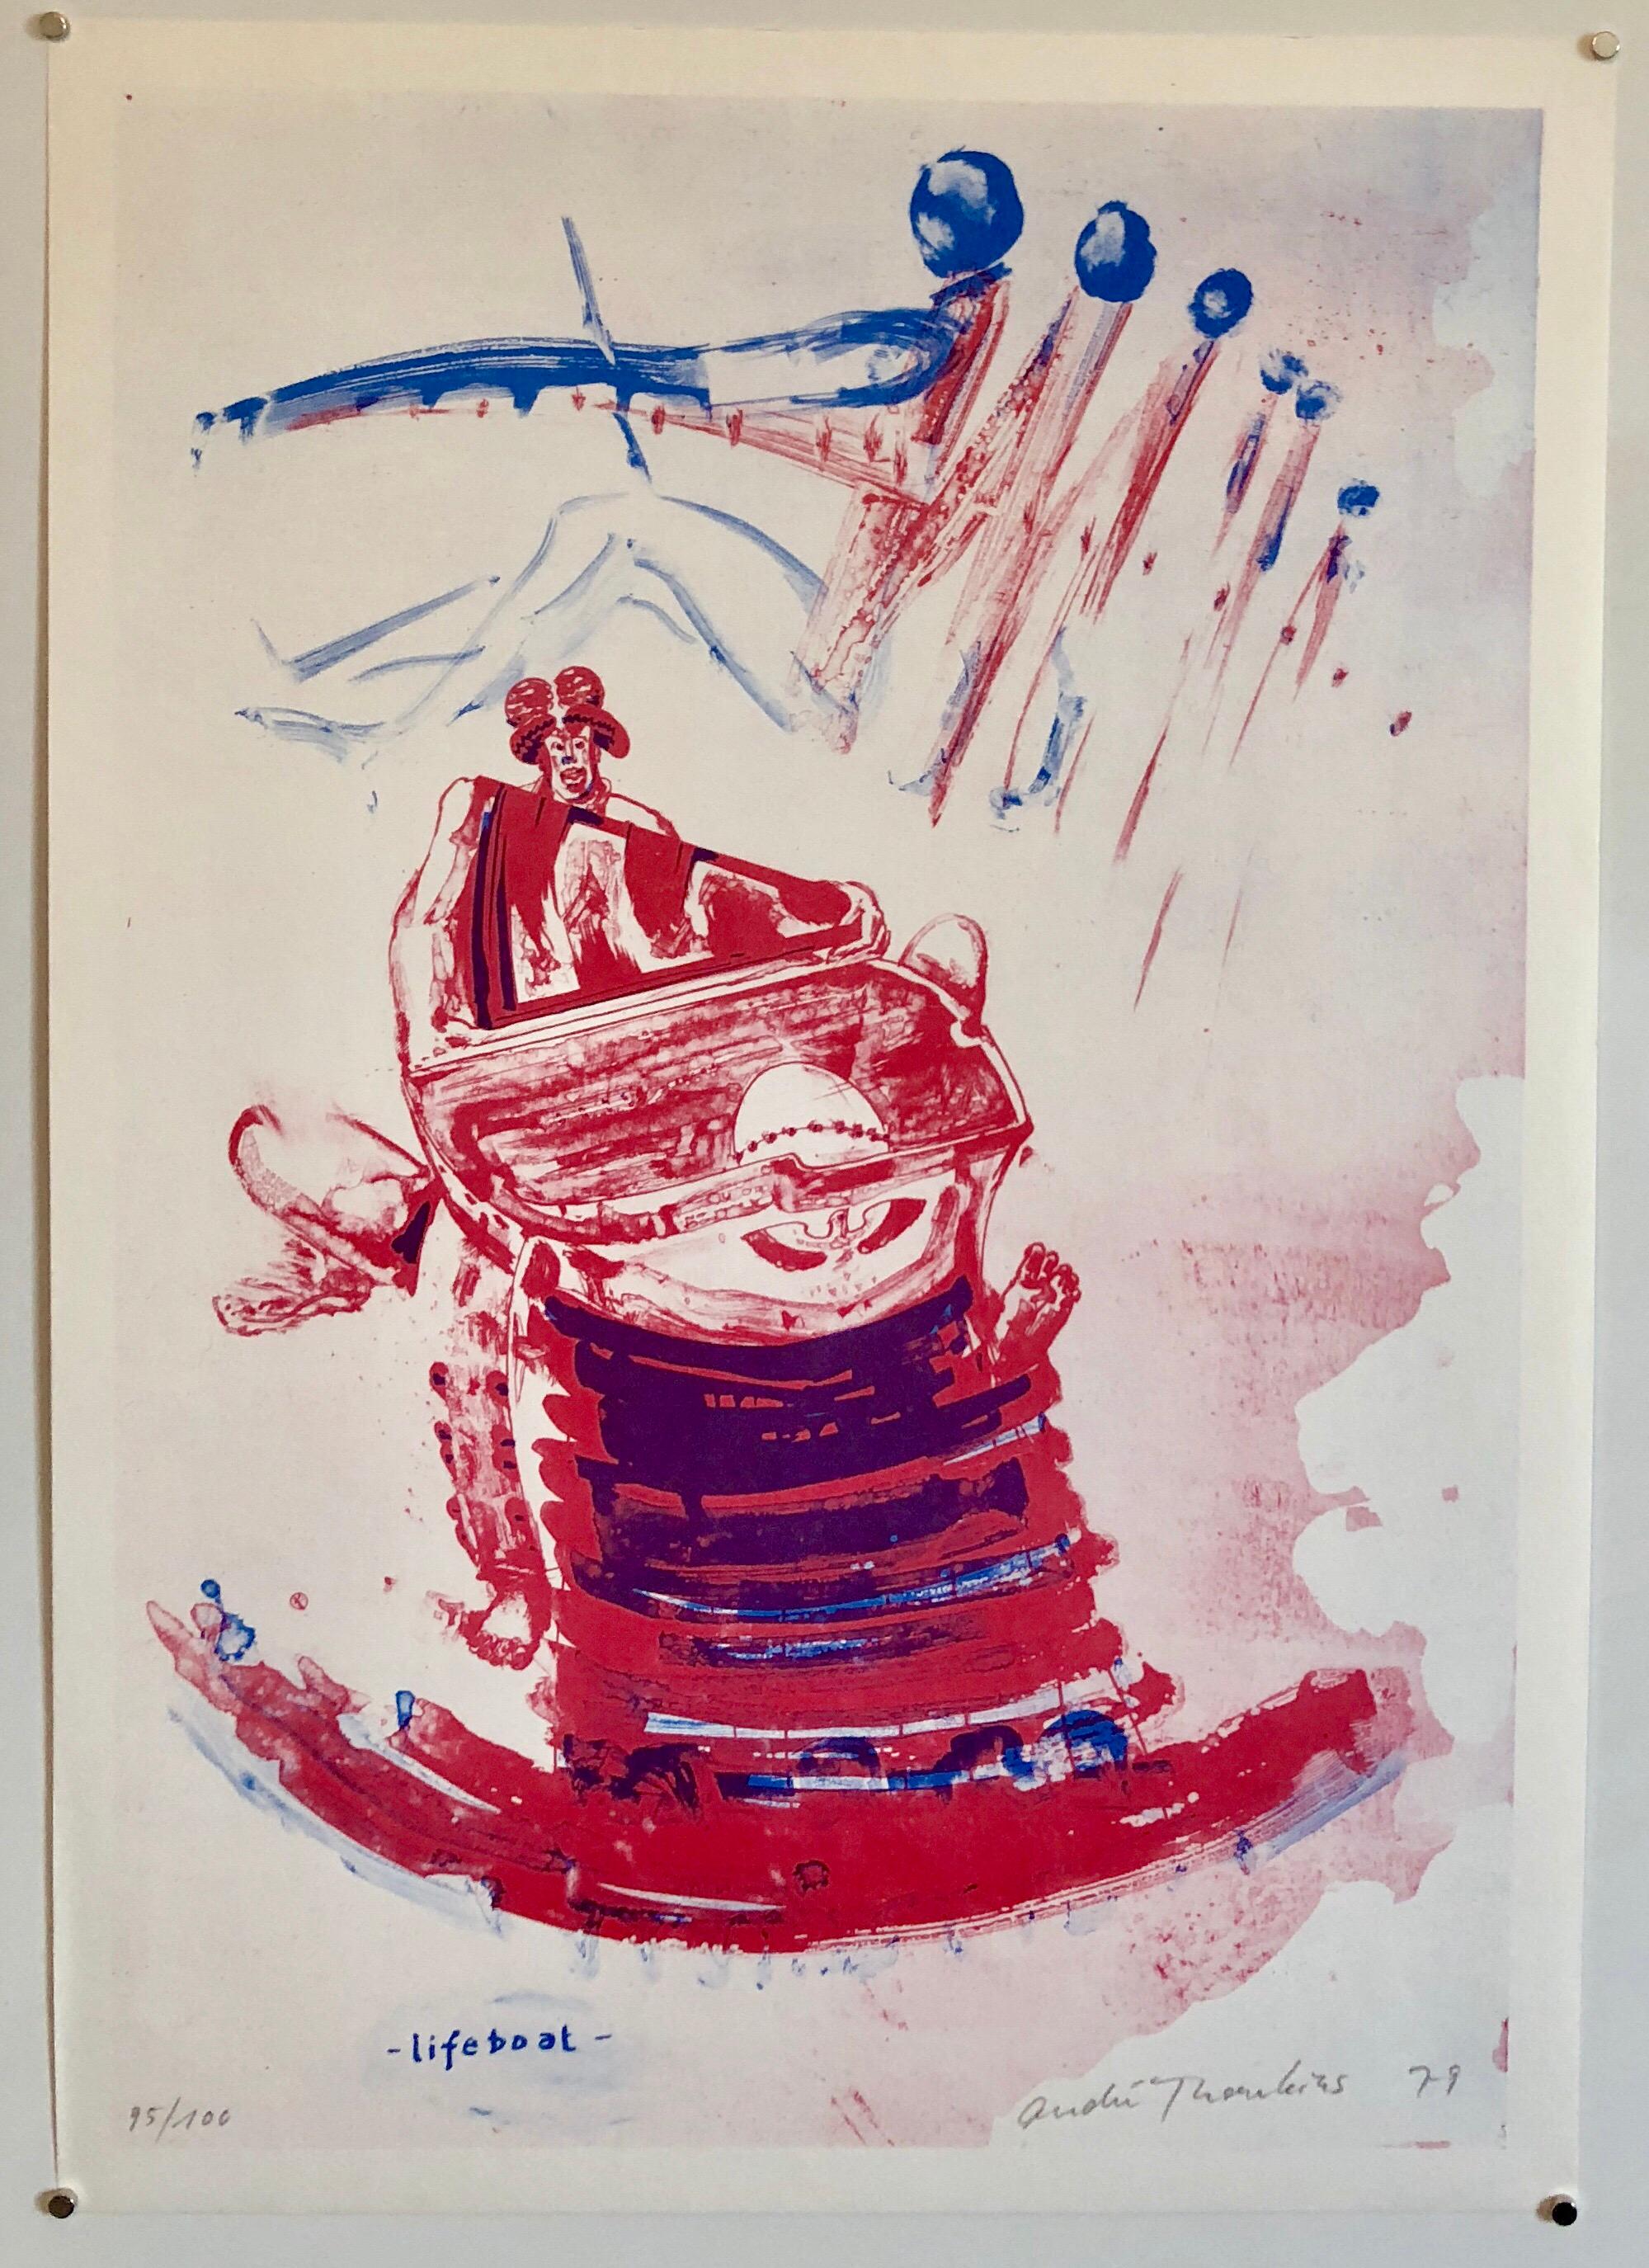 This one is titled Lifeboat and depicts a boat in red and blue with a futurist Allen Jones type figure above it. 
Published by  Edition Hansjörg Mayer, Stuttgart They published concrete poetry and art books by  Mark Boyle, Richard Hamilton, Dorothy